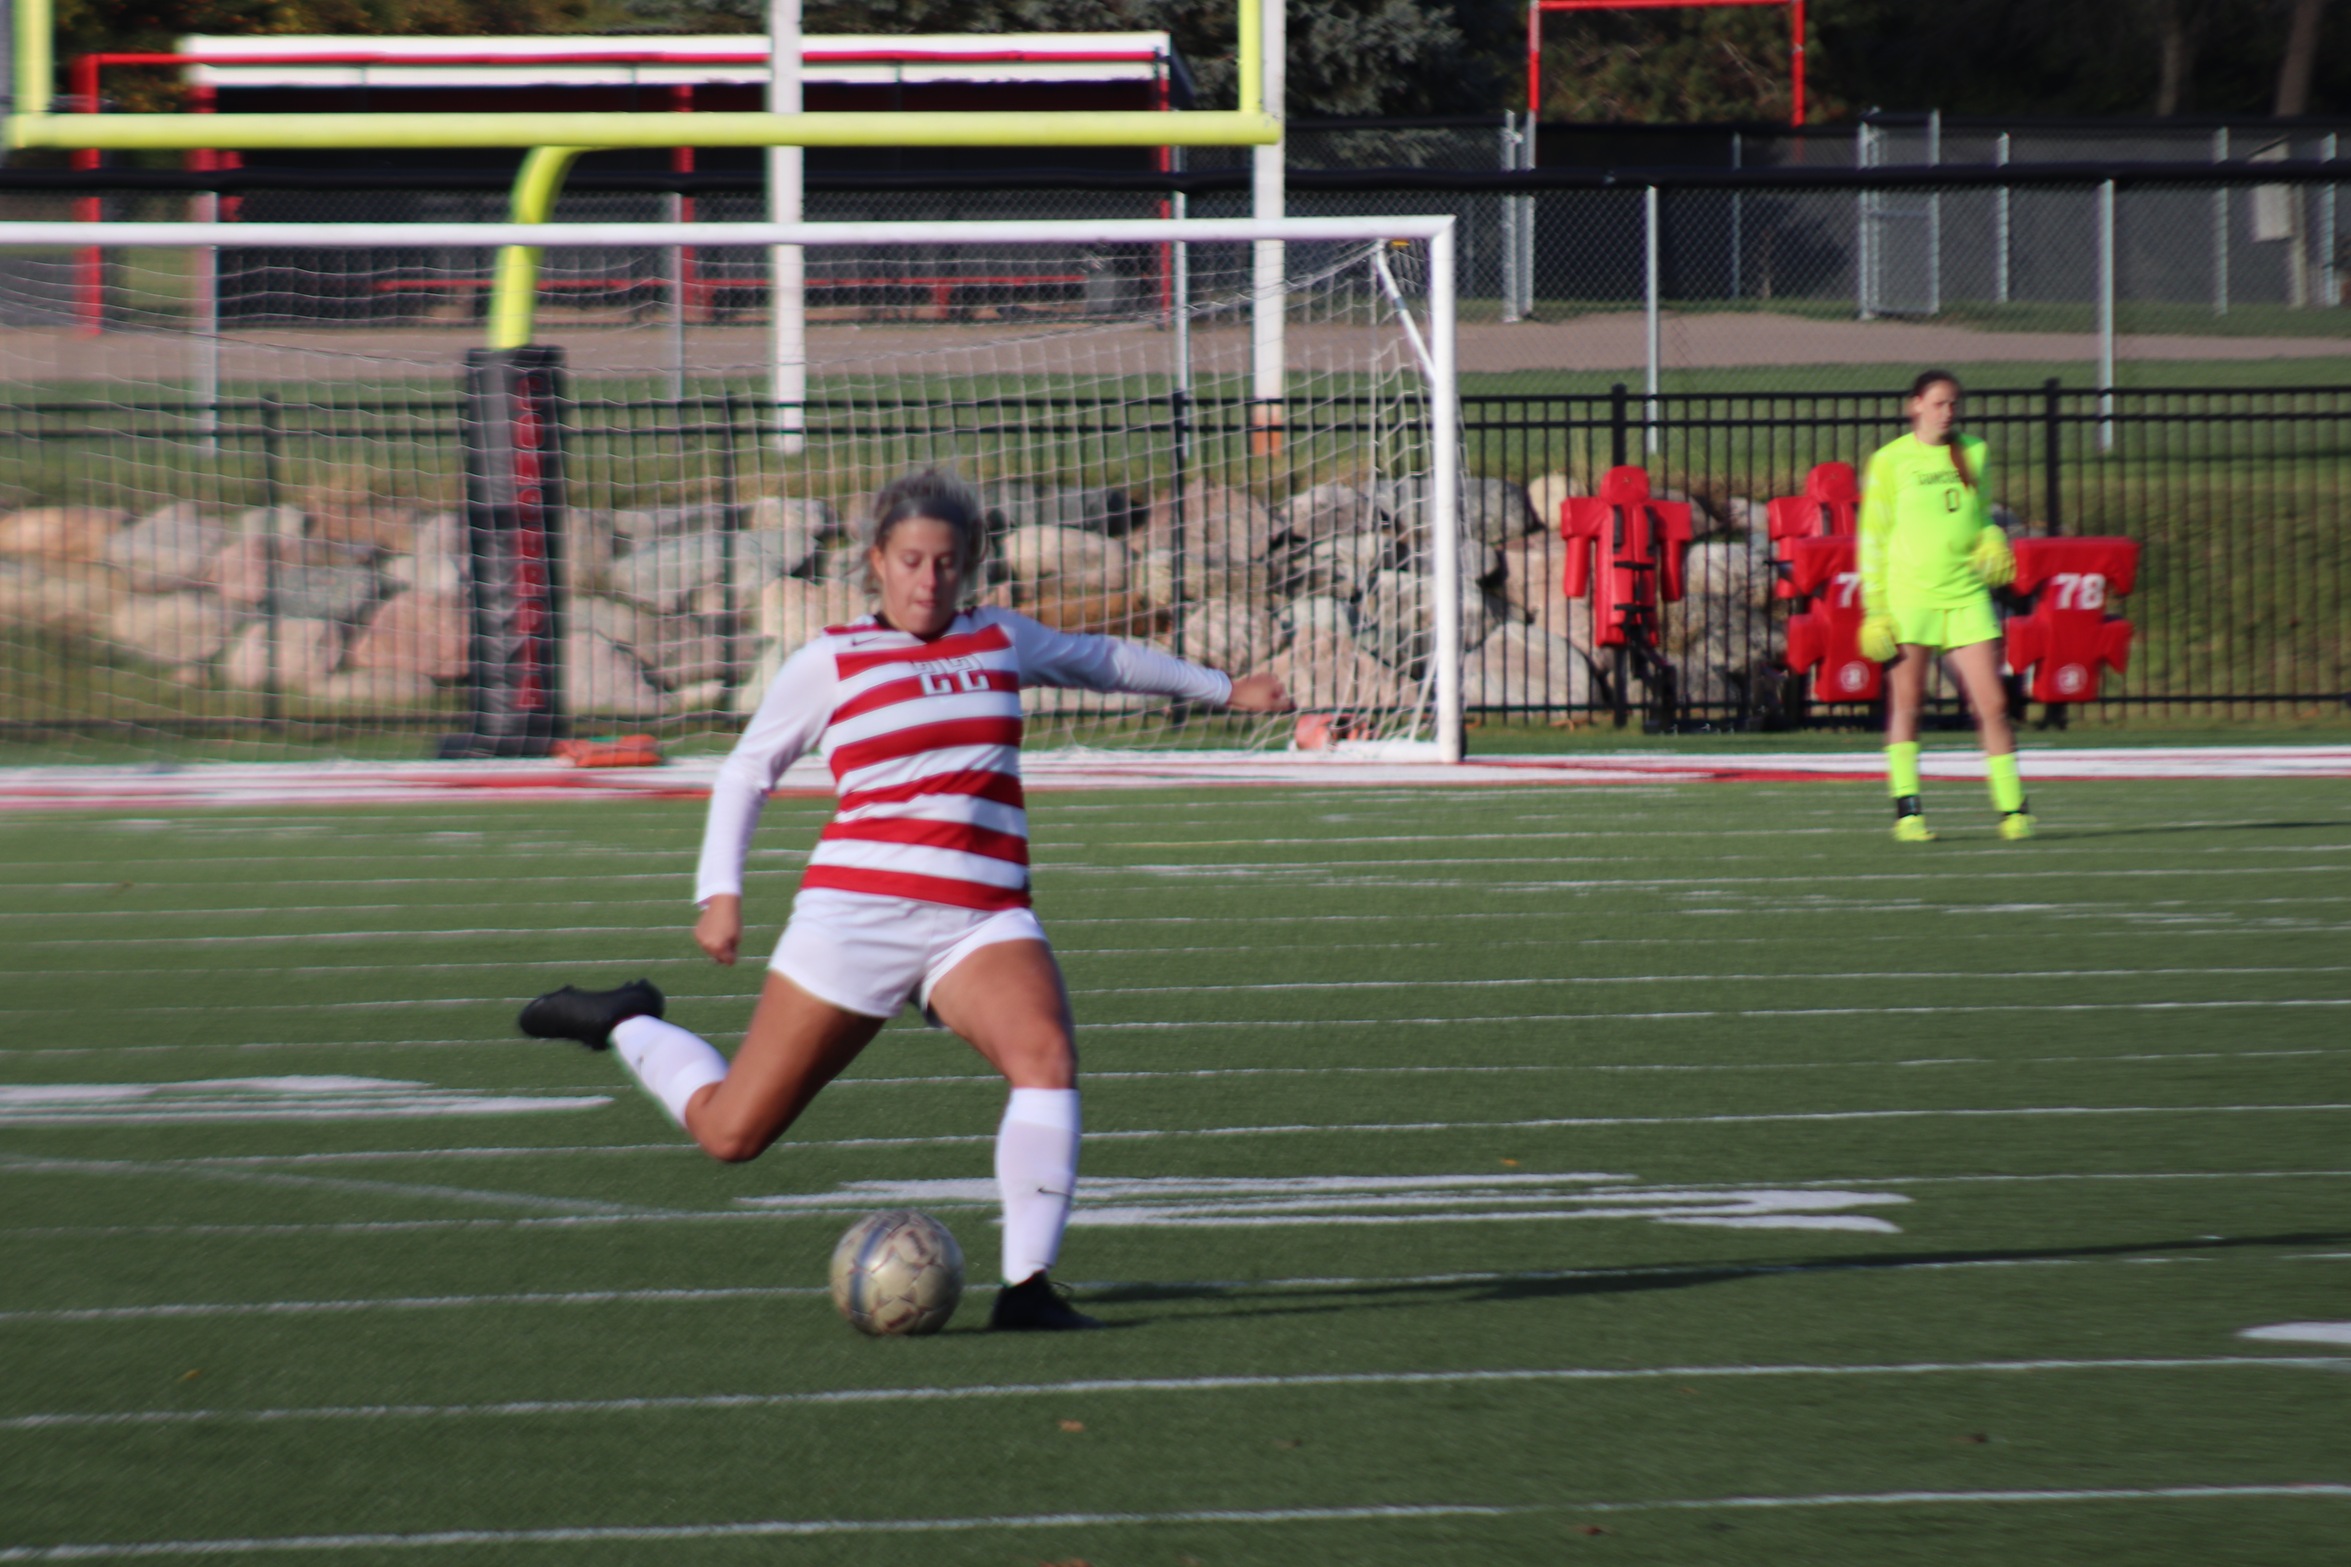 Stropich's late goal leads Cardinals to 1-0 victory over Red Wolves